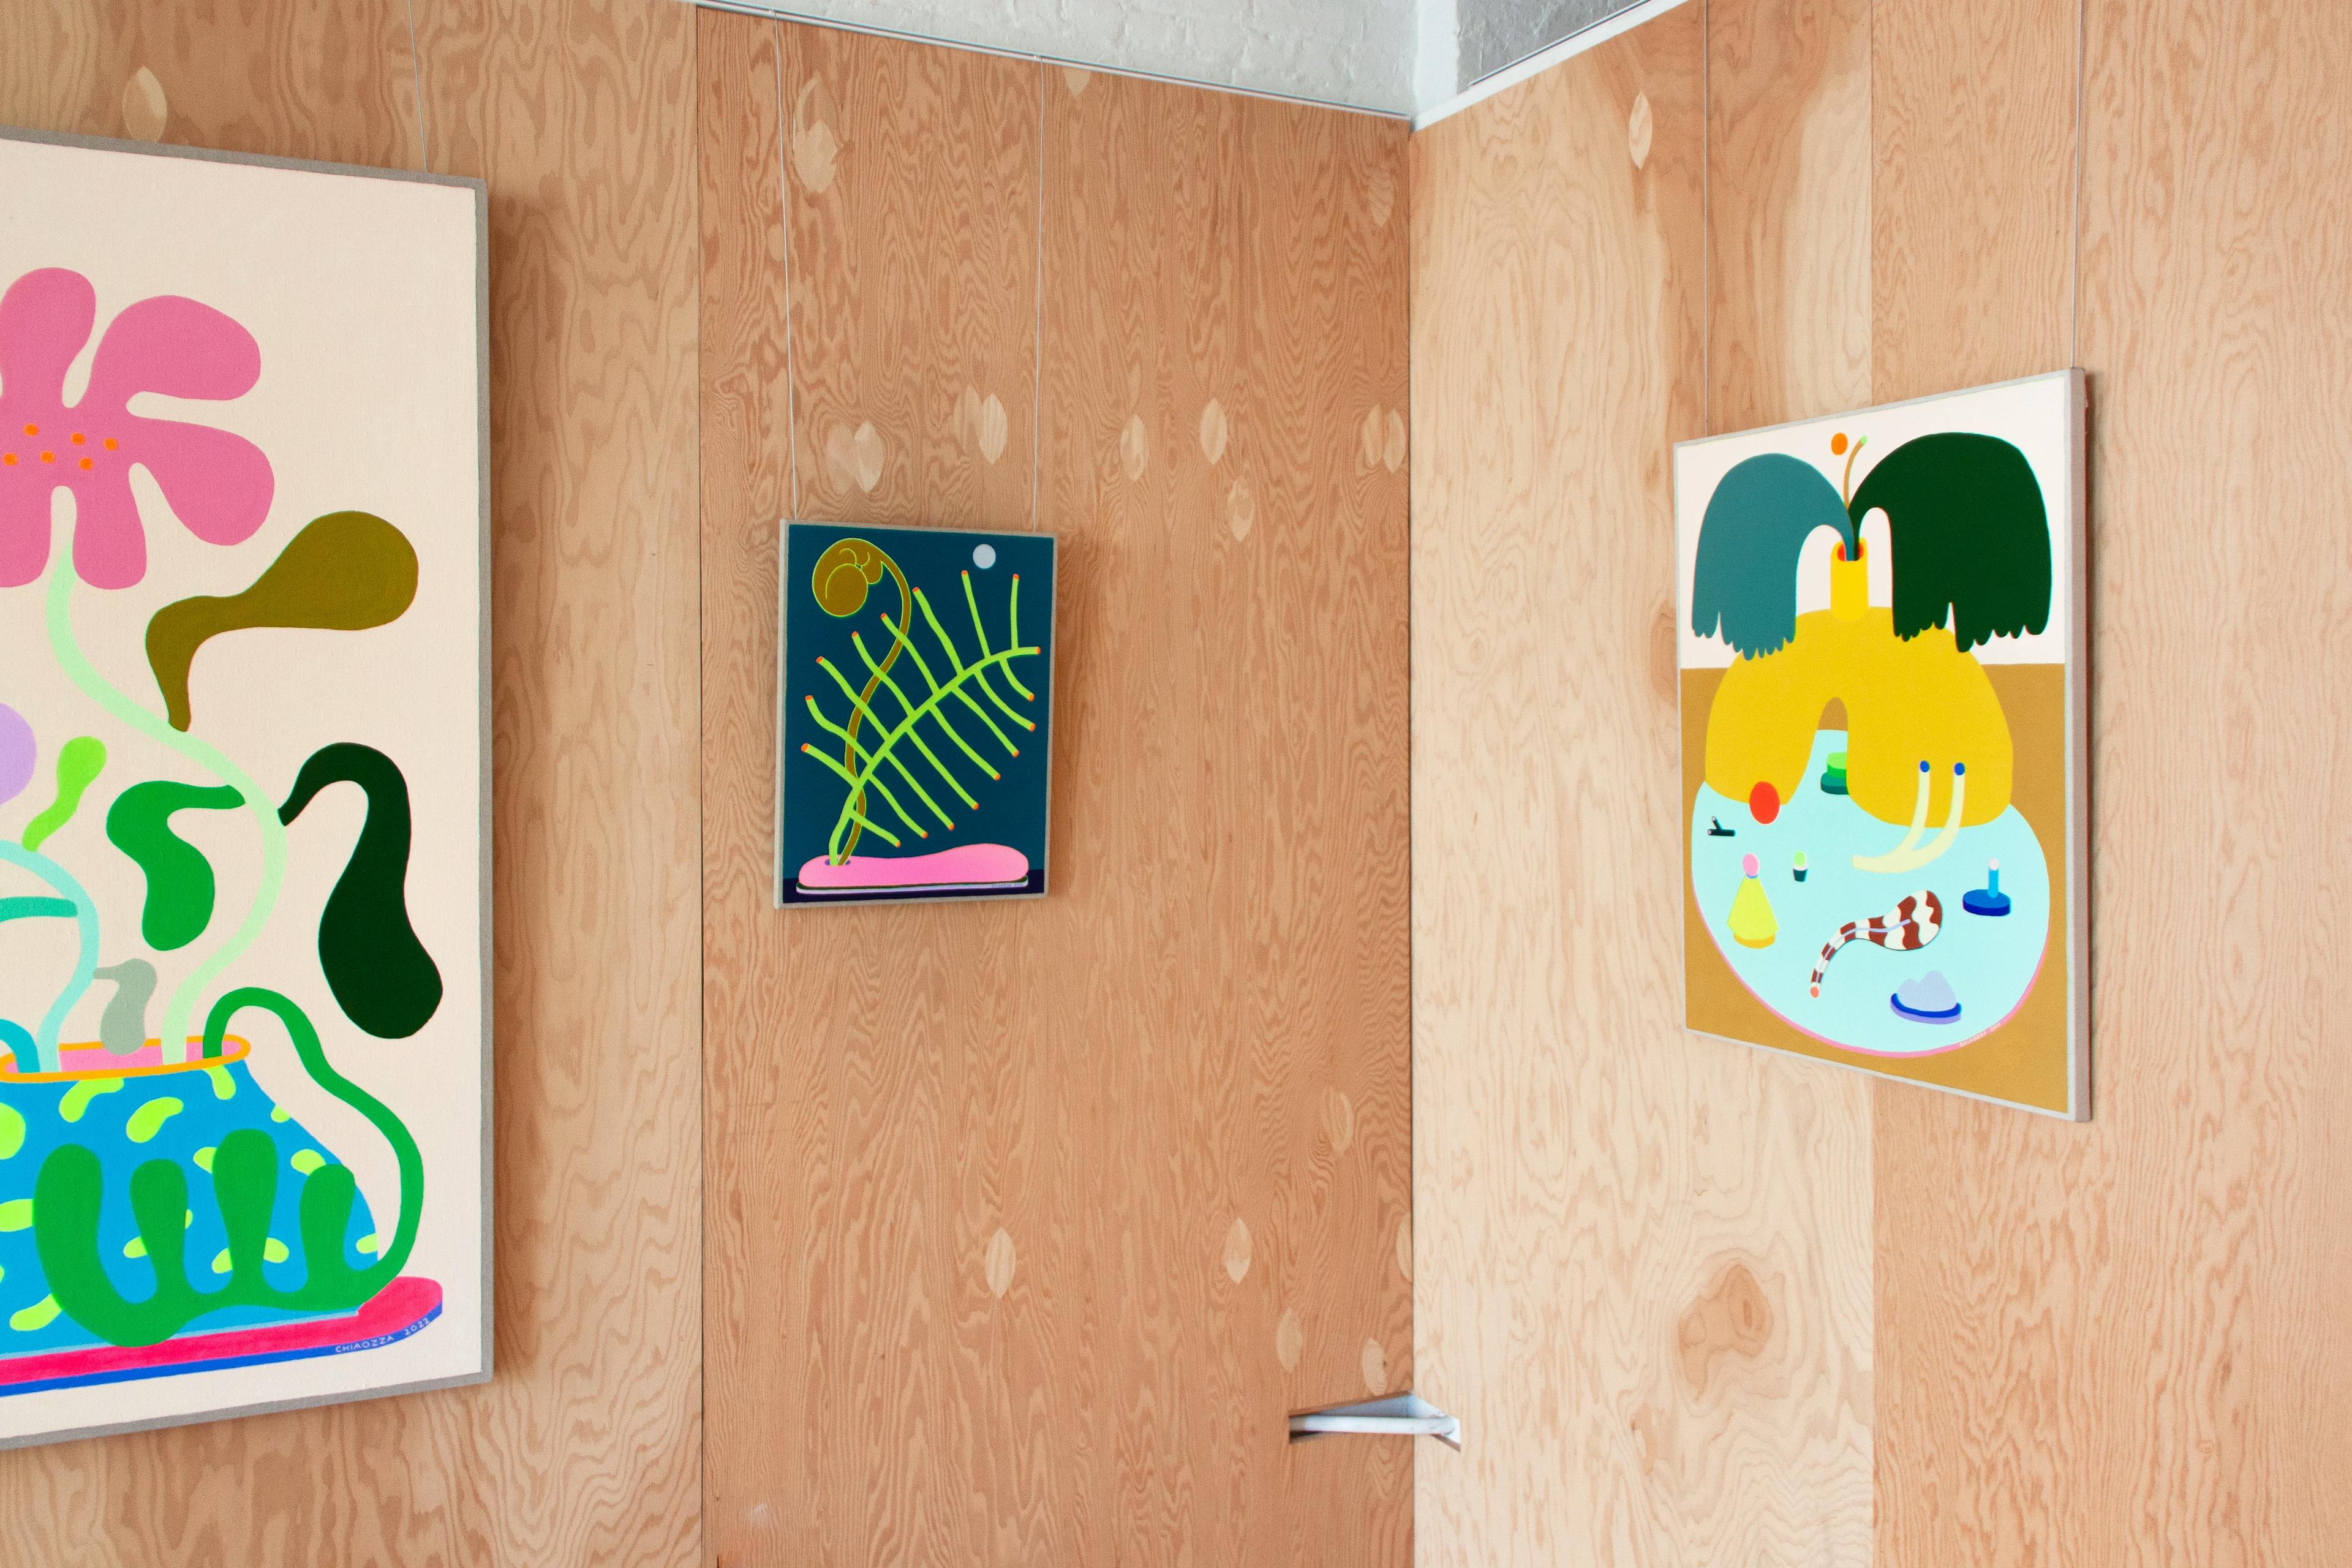 Colorful abstract paintings by Adam Frezza and Terri Chiao, known as CHIAOZZA, hang in a gallery for the exhibition Slow Growth.